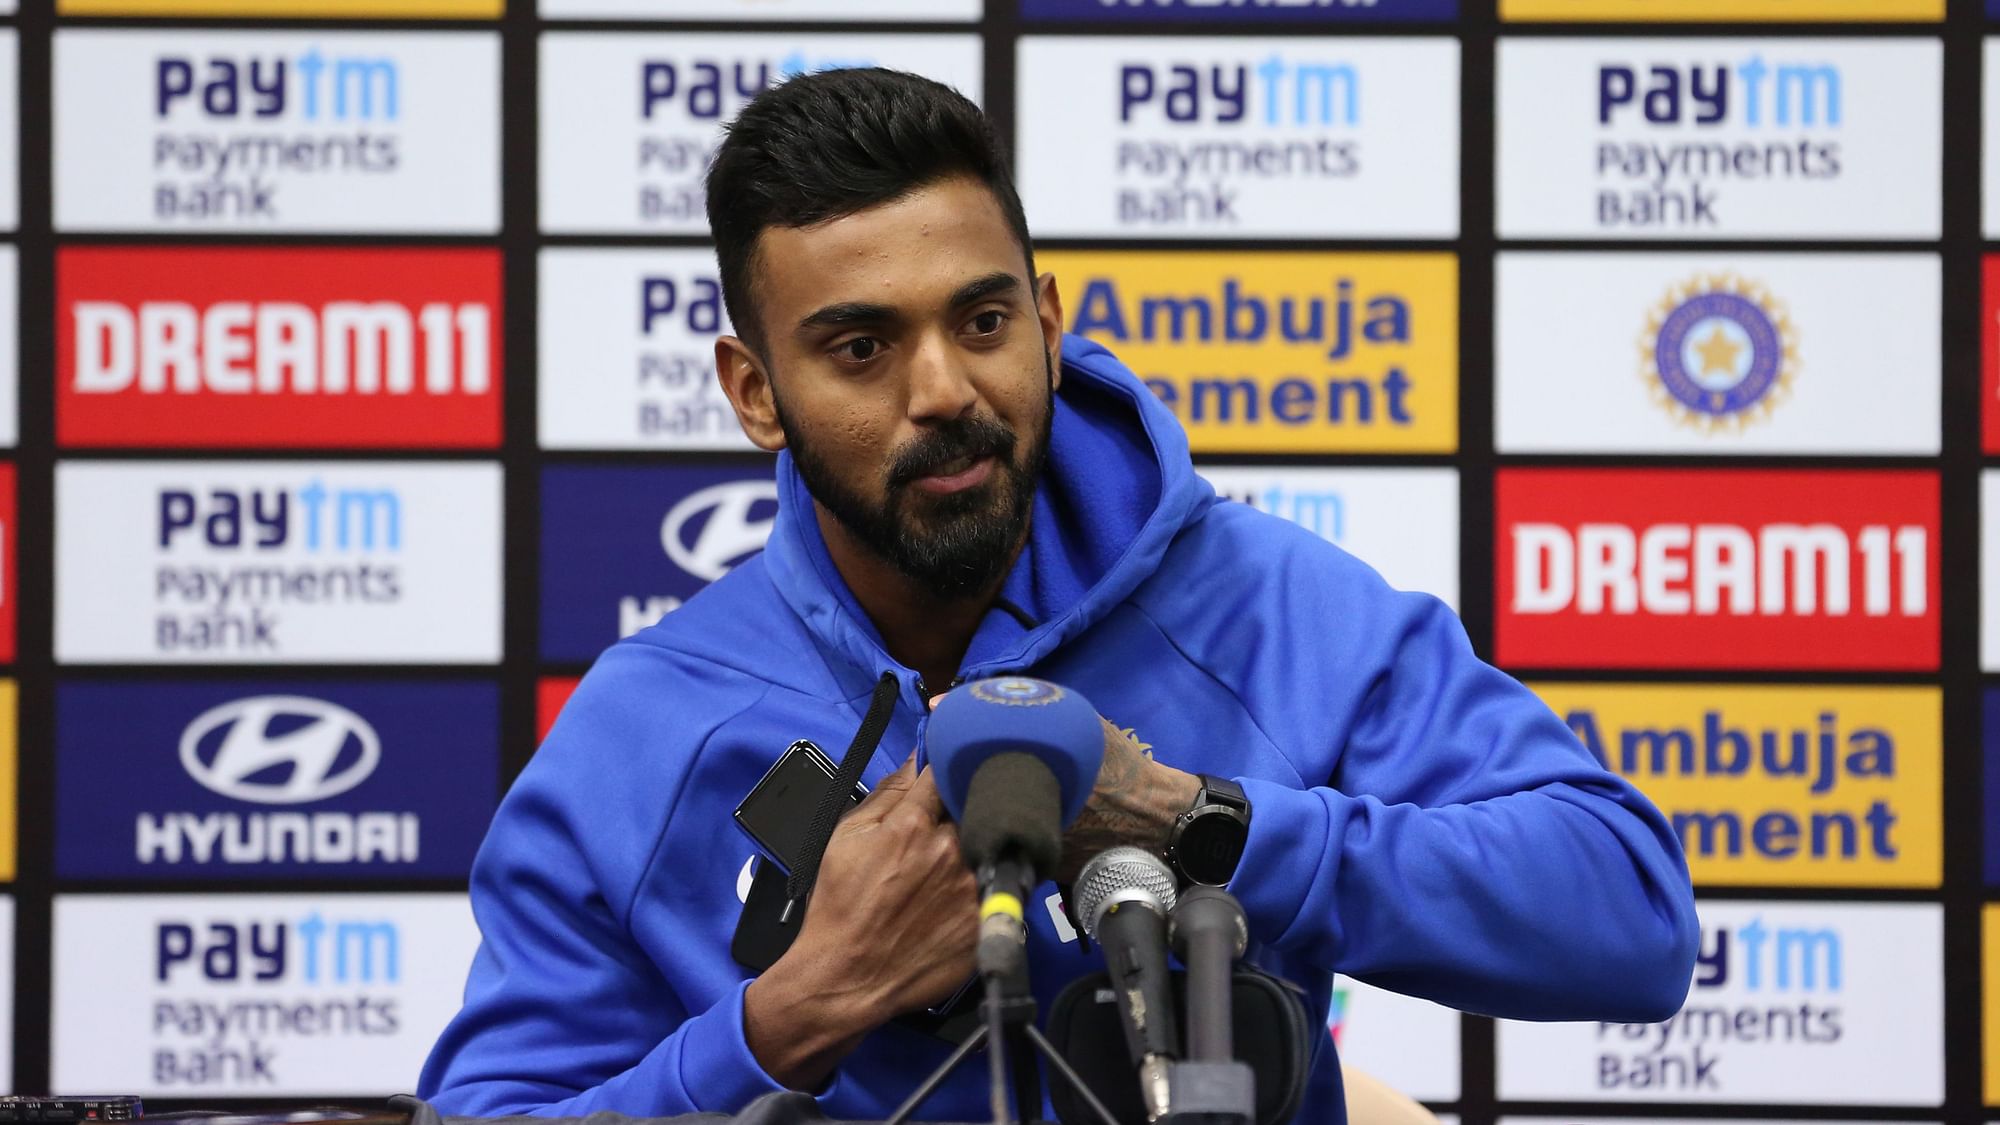 KL Rahul says he watched videos of AB de Villiers and Steve Smith to prepare for middle order batting.